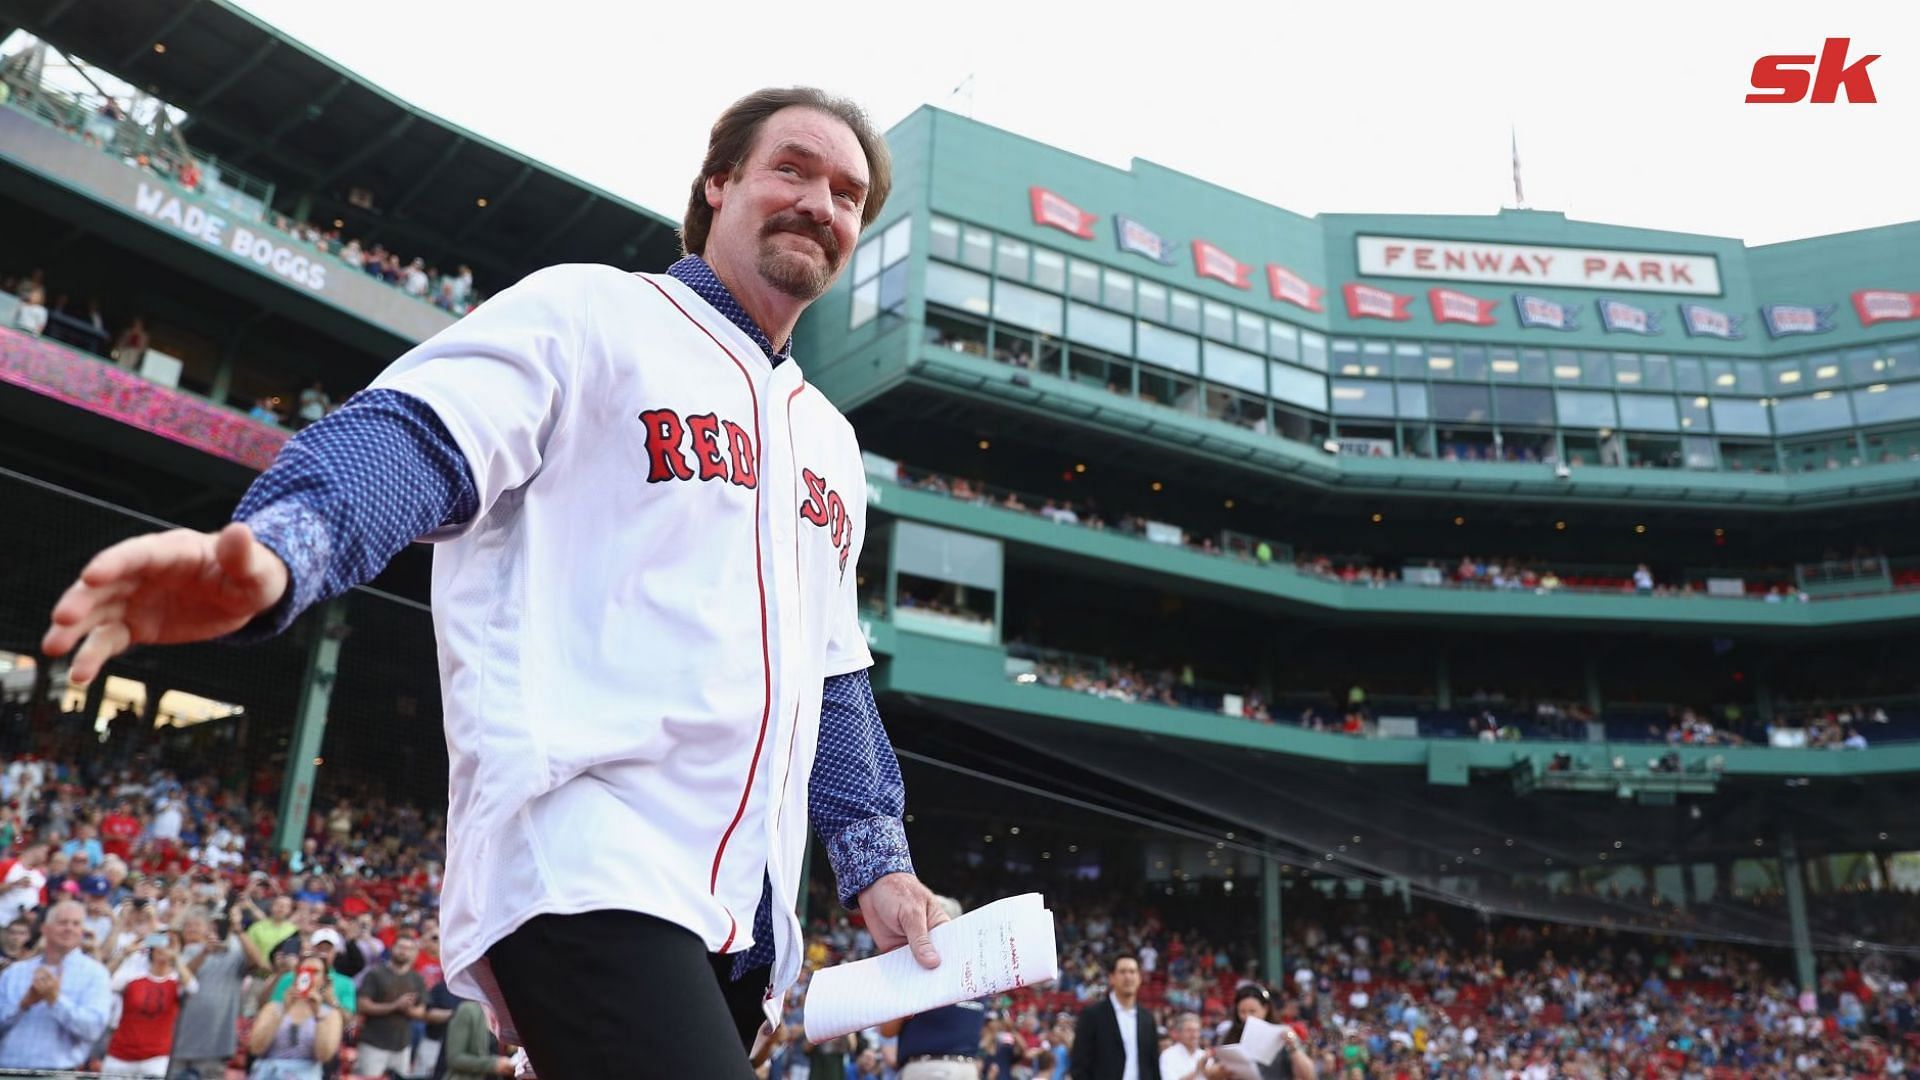 Why did the Red Sox take so long to retire Wade Boggs' number